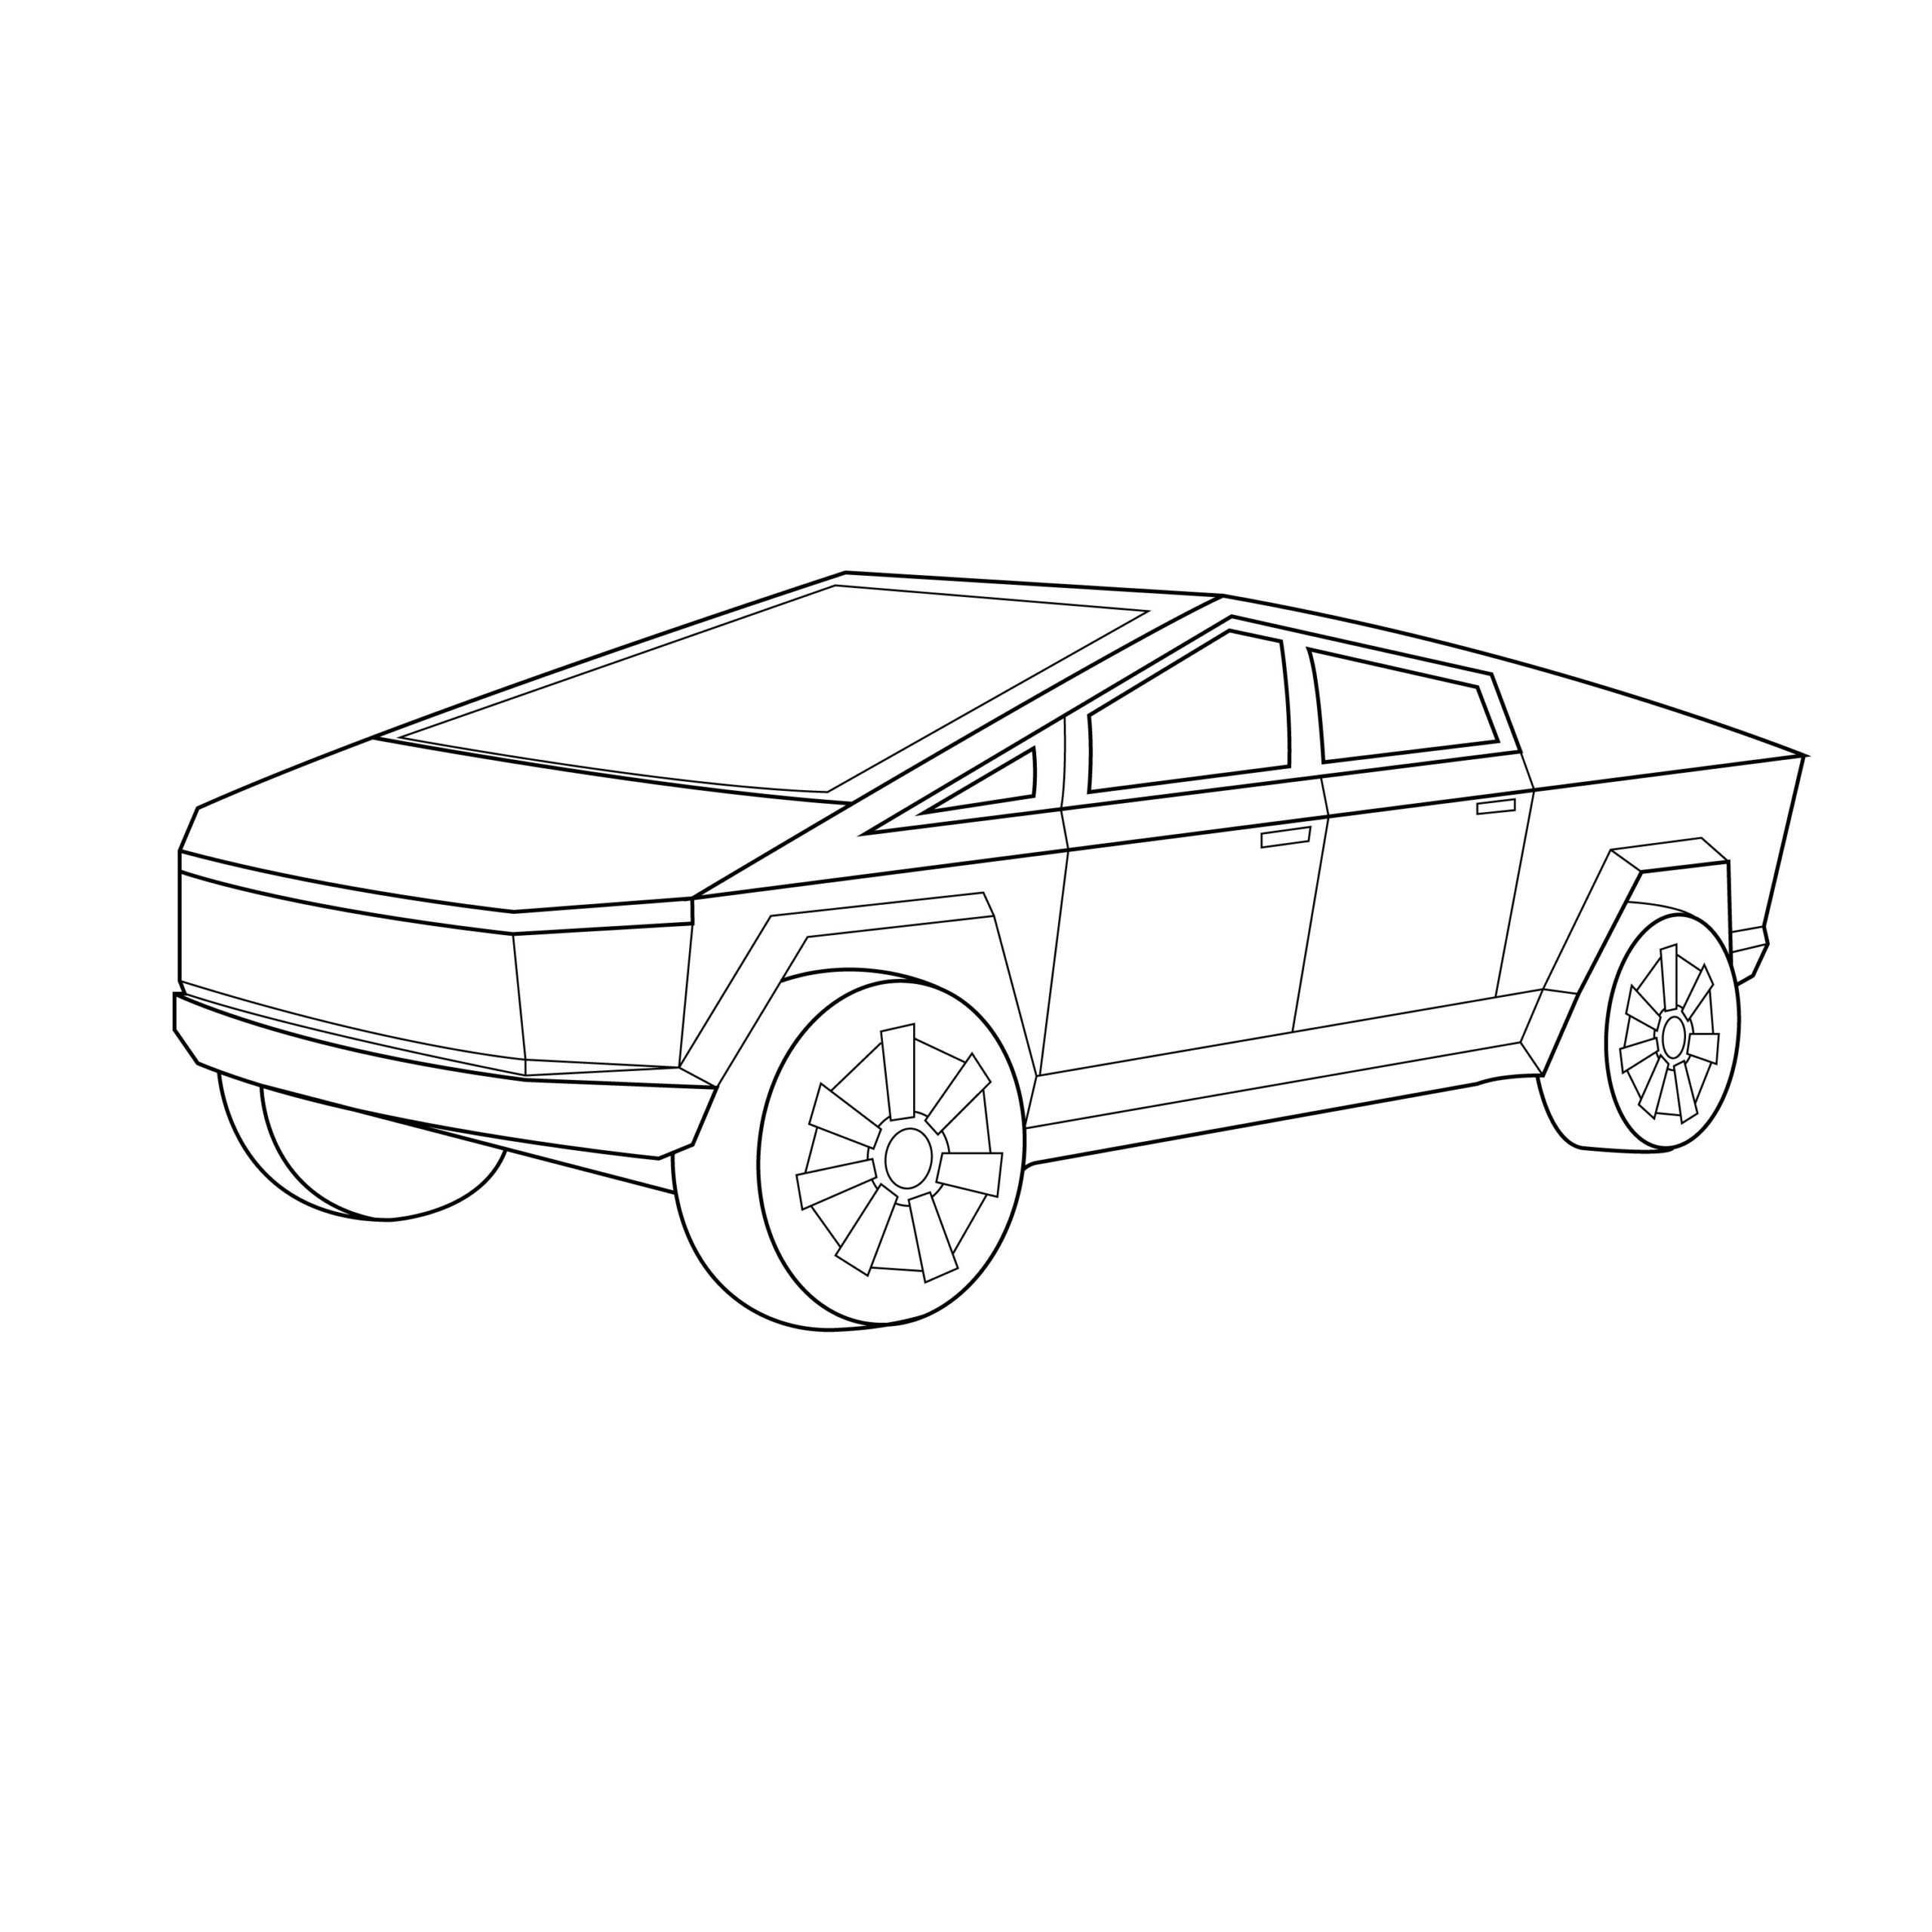 Line Drawing Of The Tesla Cybertruck In 2020 Line Drawing